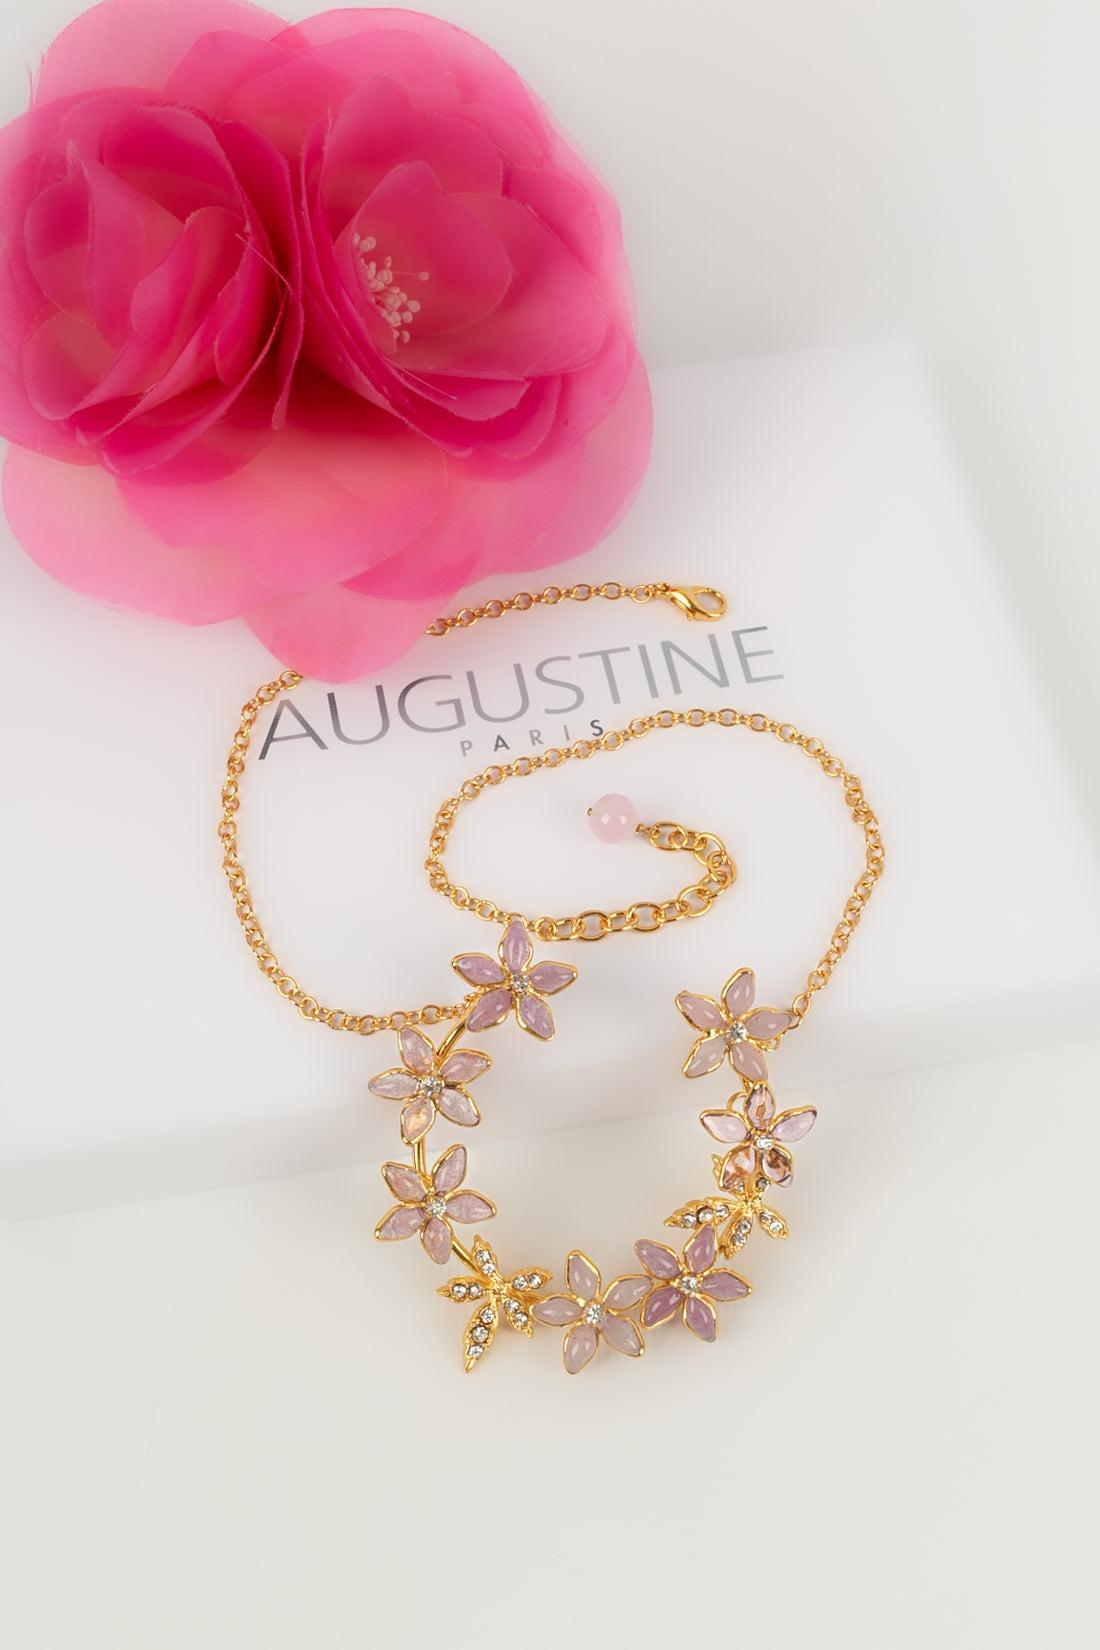 Augustine - (Made in France) Necklace in gold-plated metal, glass paste, and rhinetones.

Additional information:
Condition: Very good condition
Dimensions: Length: from 39 cm to 44 cm

Seller Reference: BC176